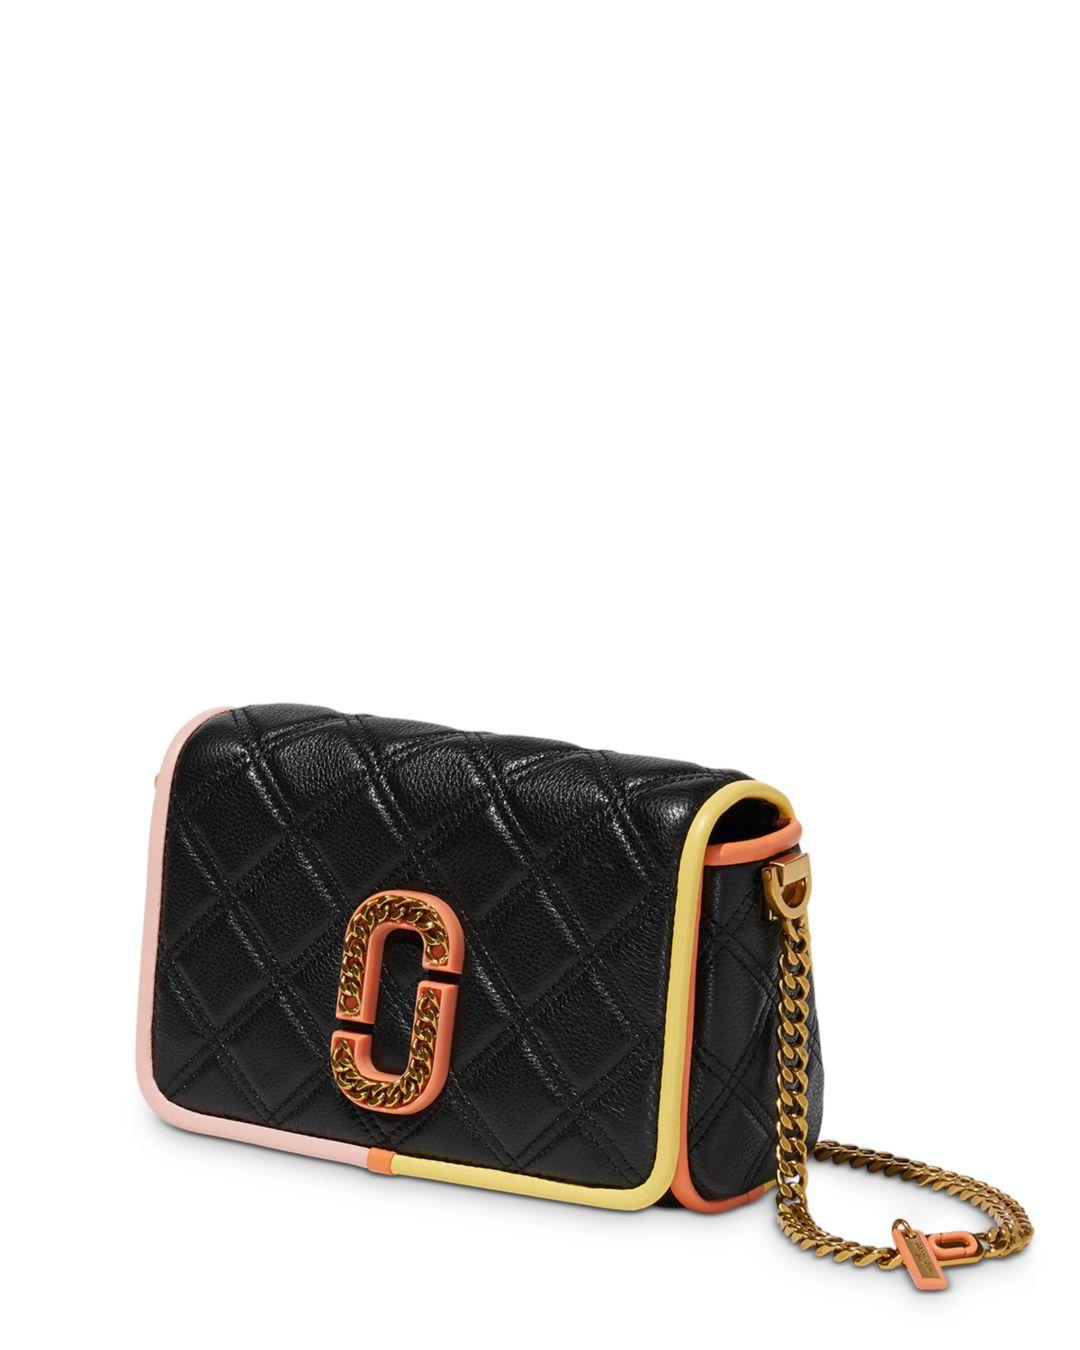 Marc Jacobs Leather The Status Flap Colour Block Bag in Black - Lyst